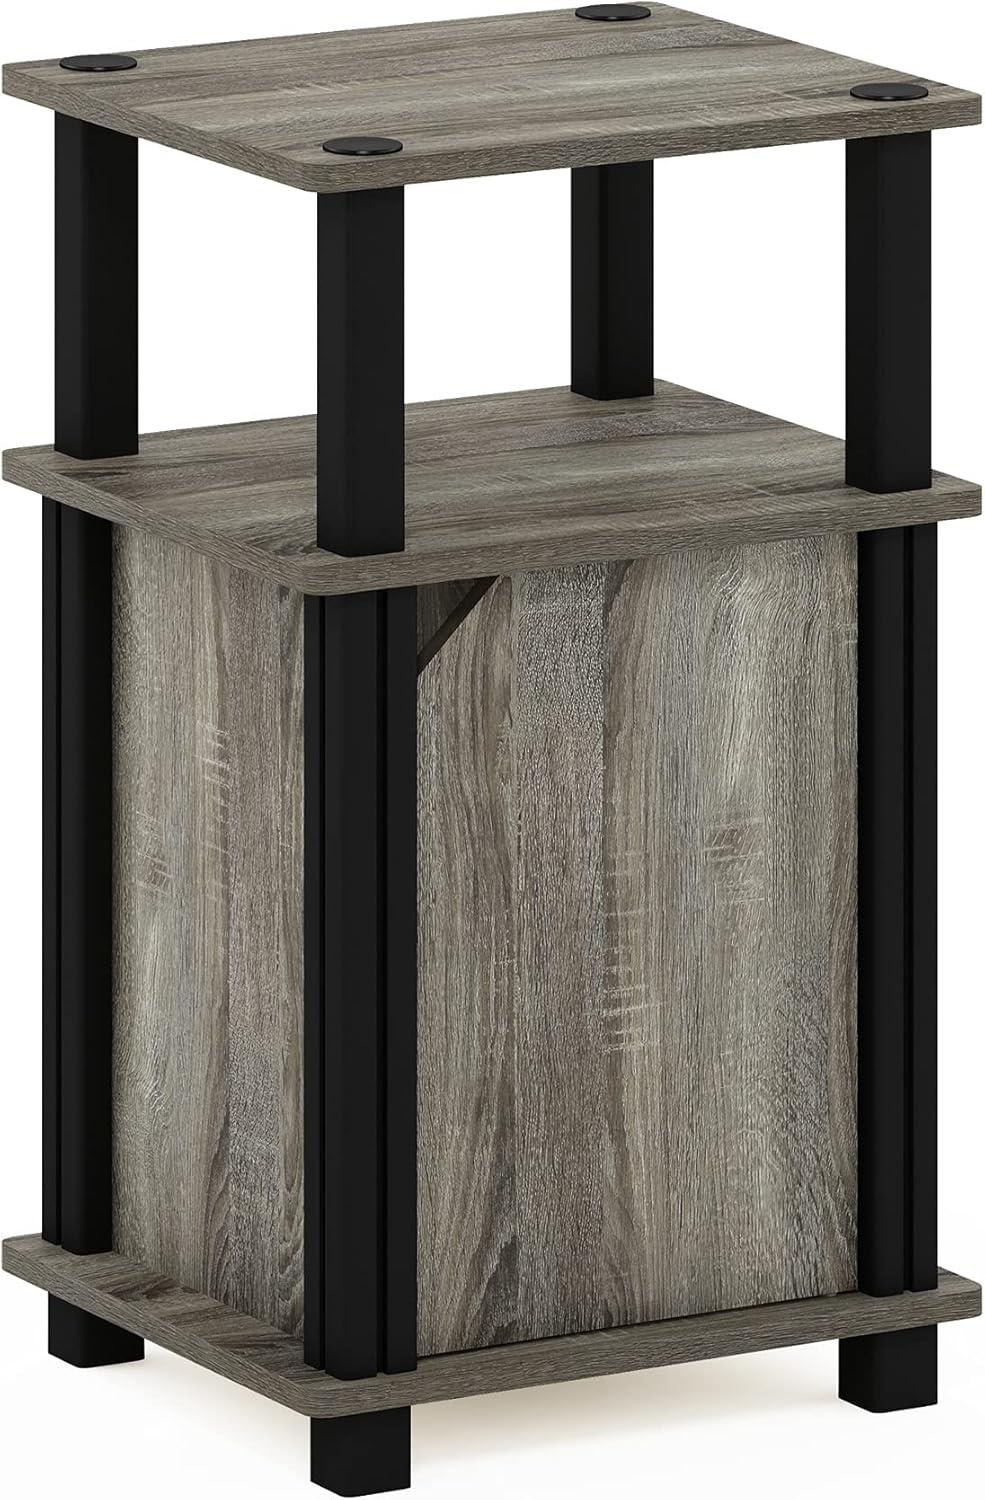 French Oak & Black Square End Table with Storage Shelf